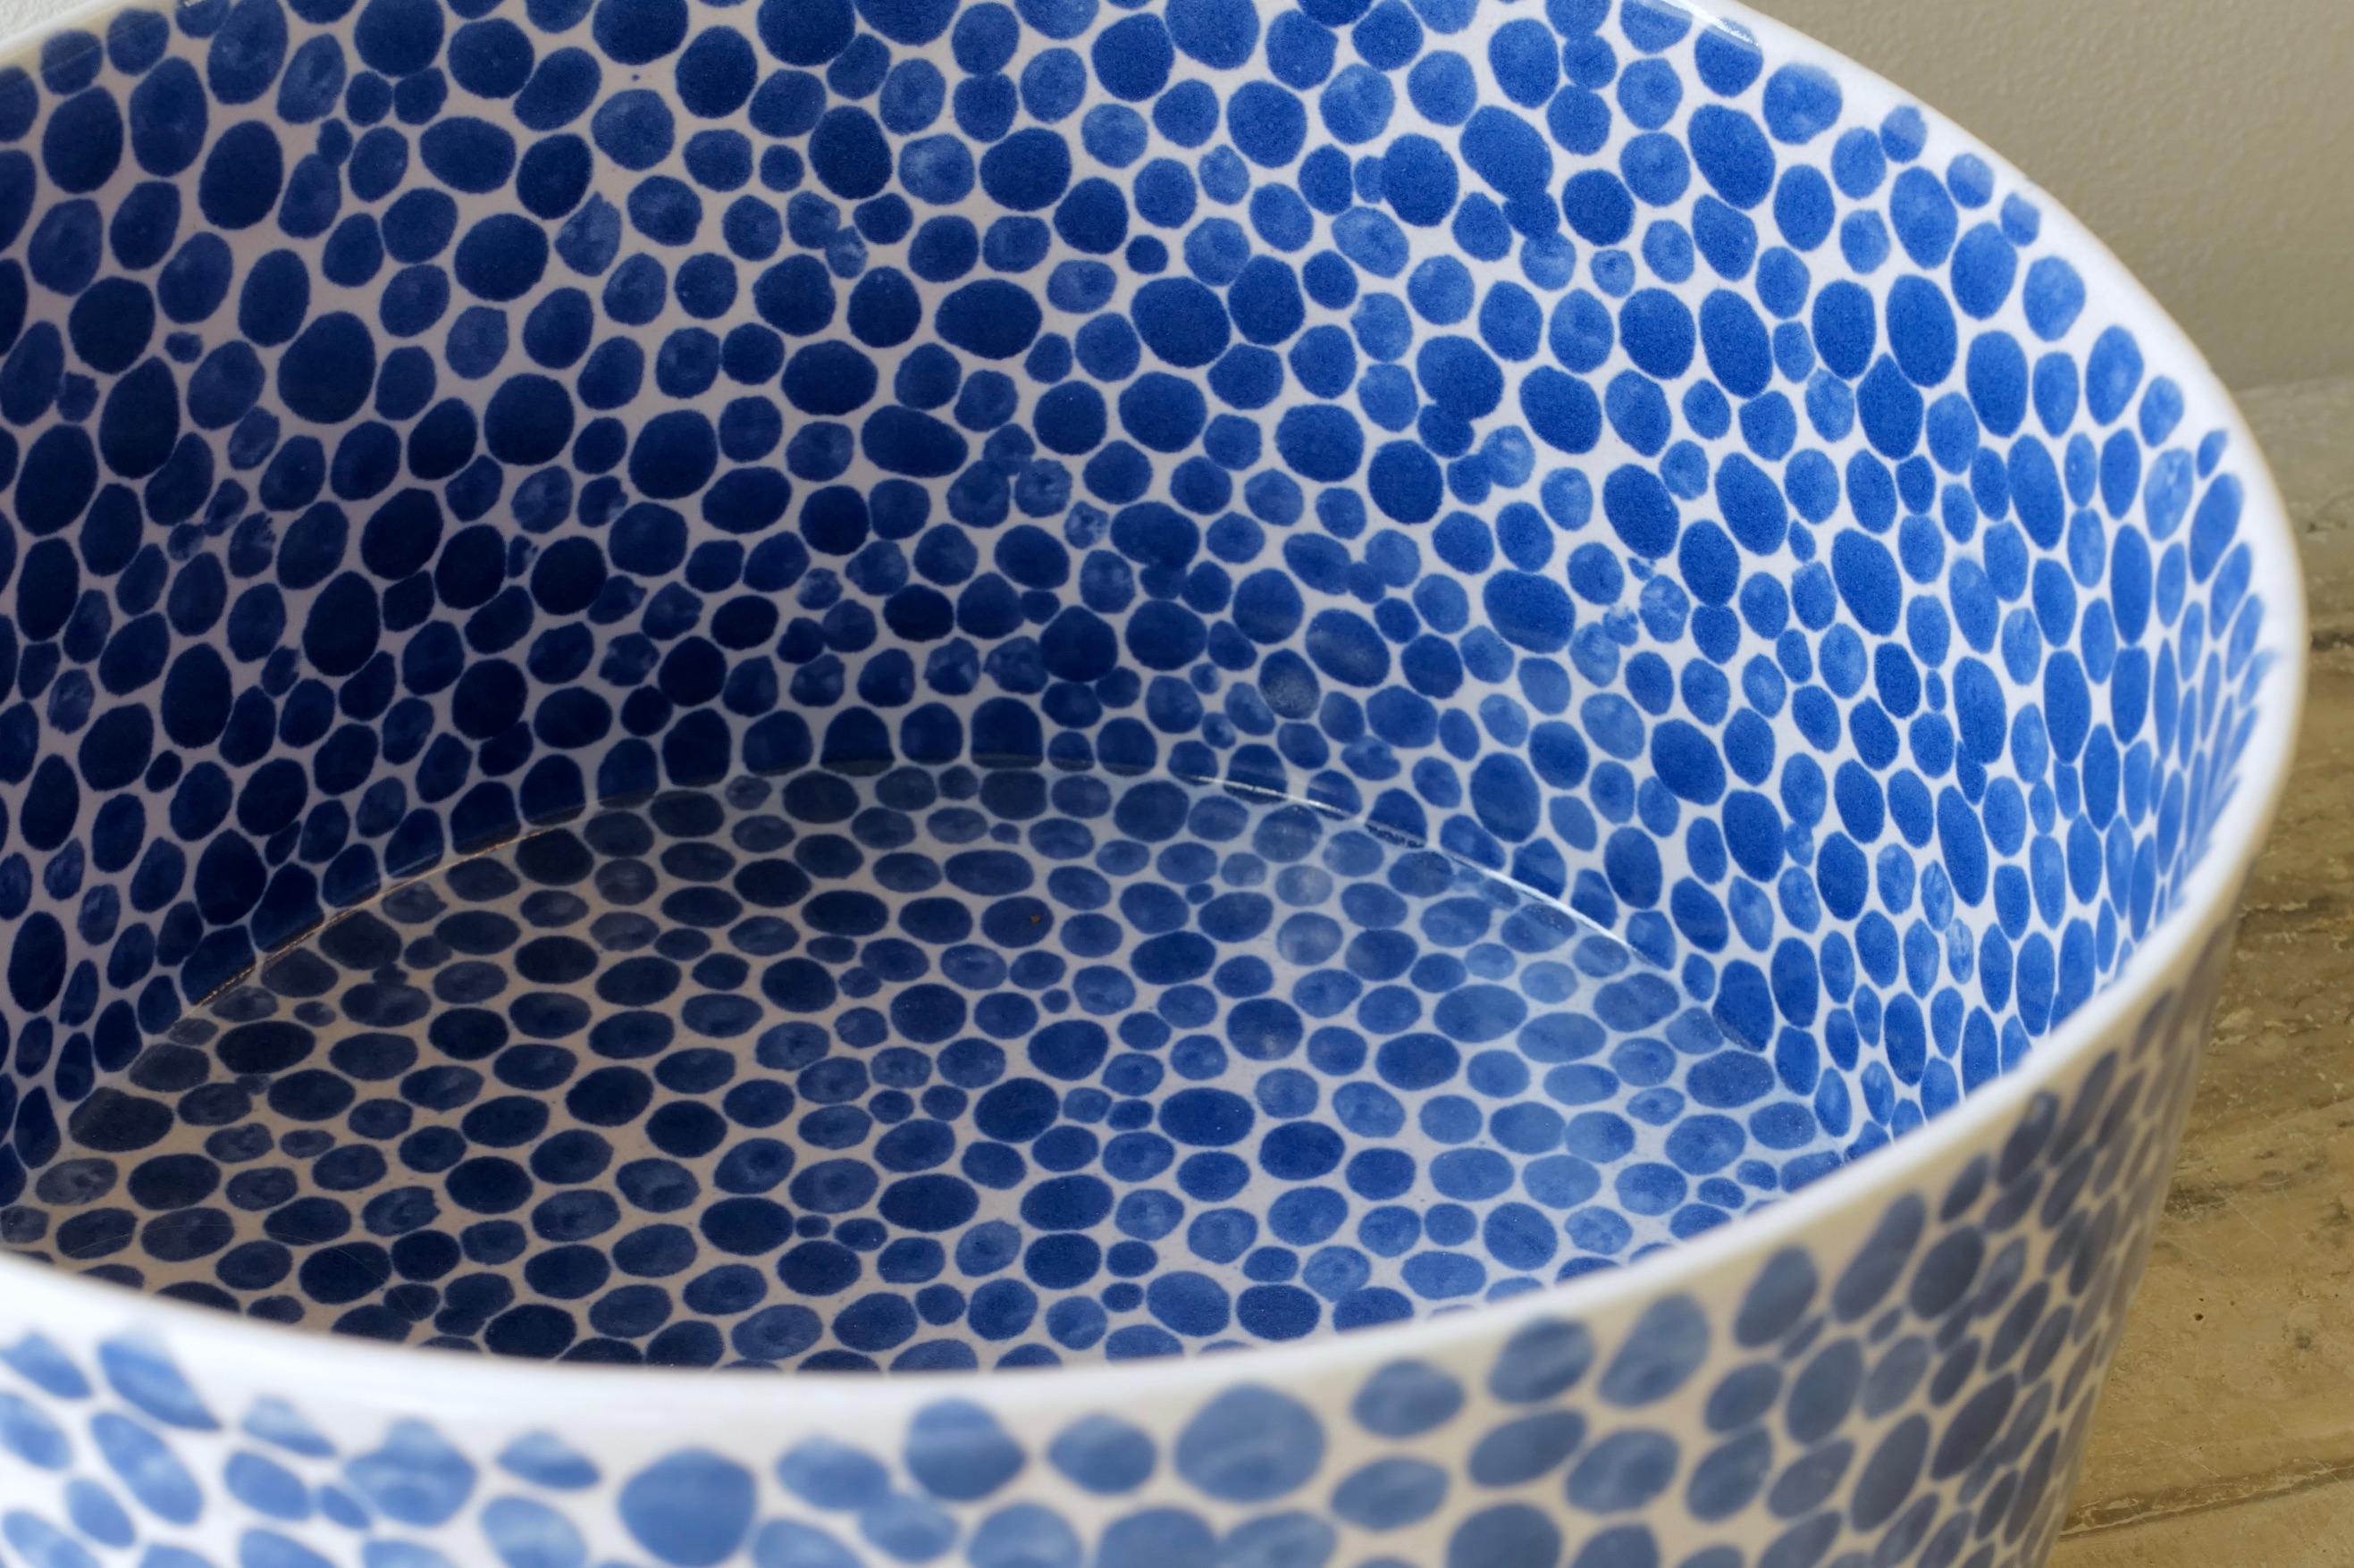 Blue Dots Wide Deep Porcelain Bowl by Lana Kova In New Condition For Sale In New York City, NY